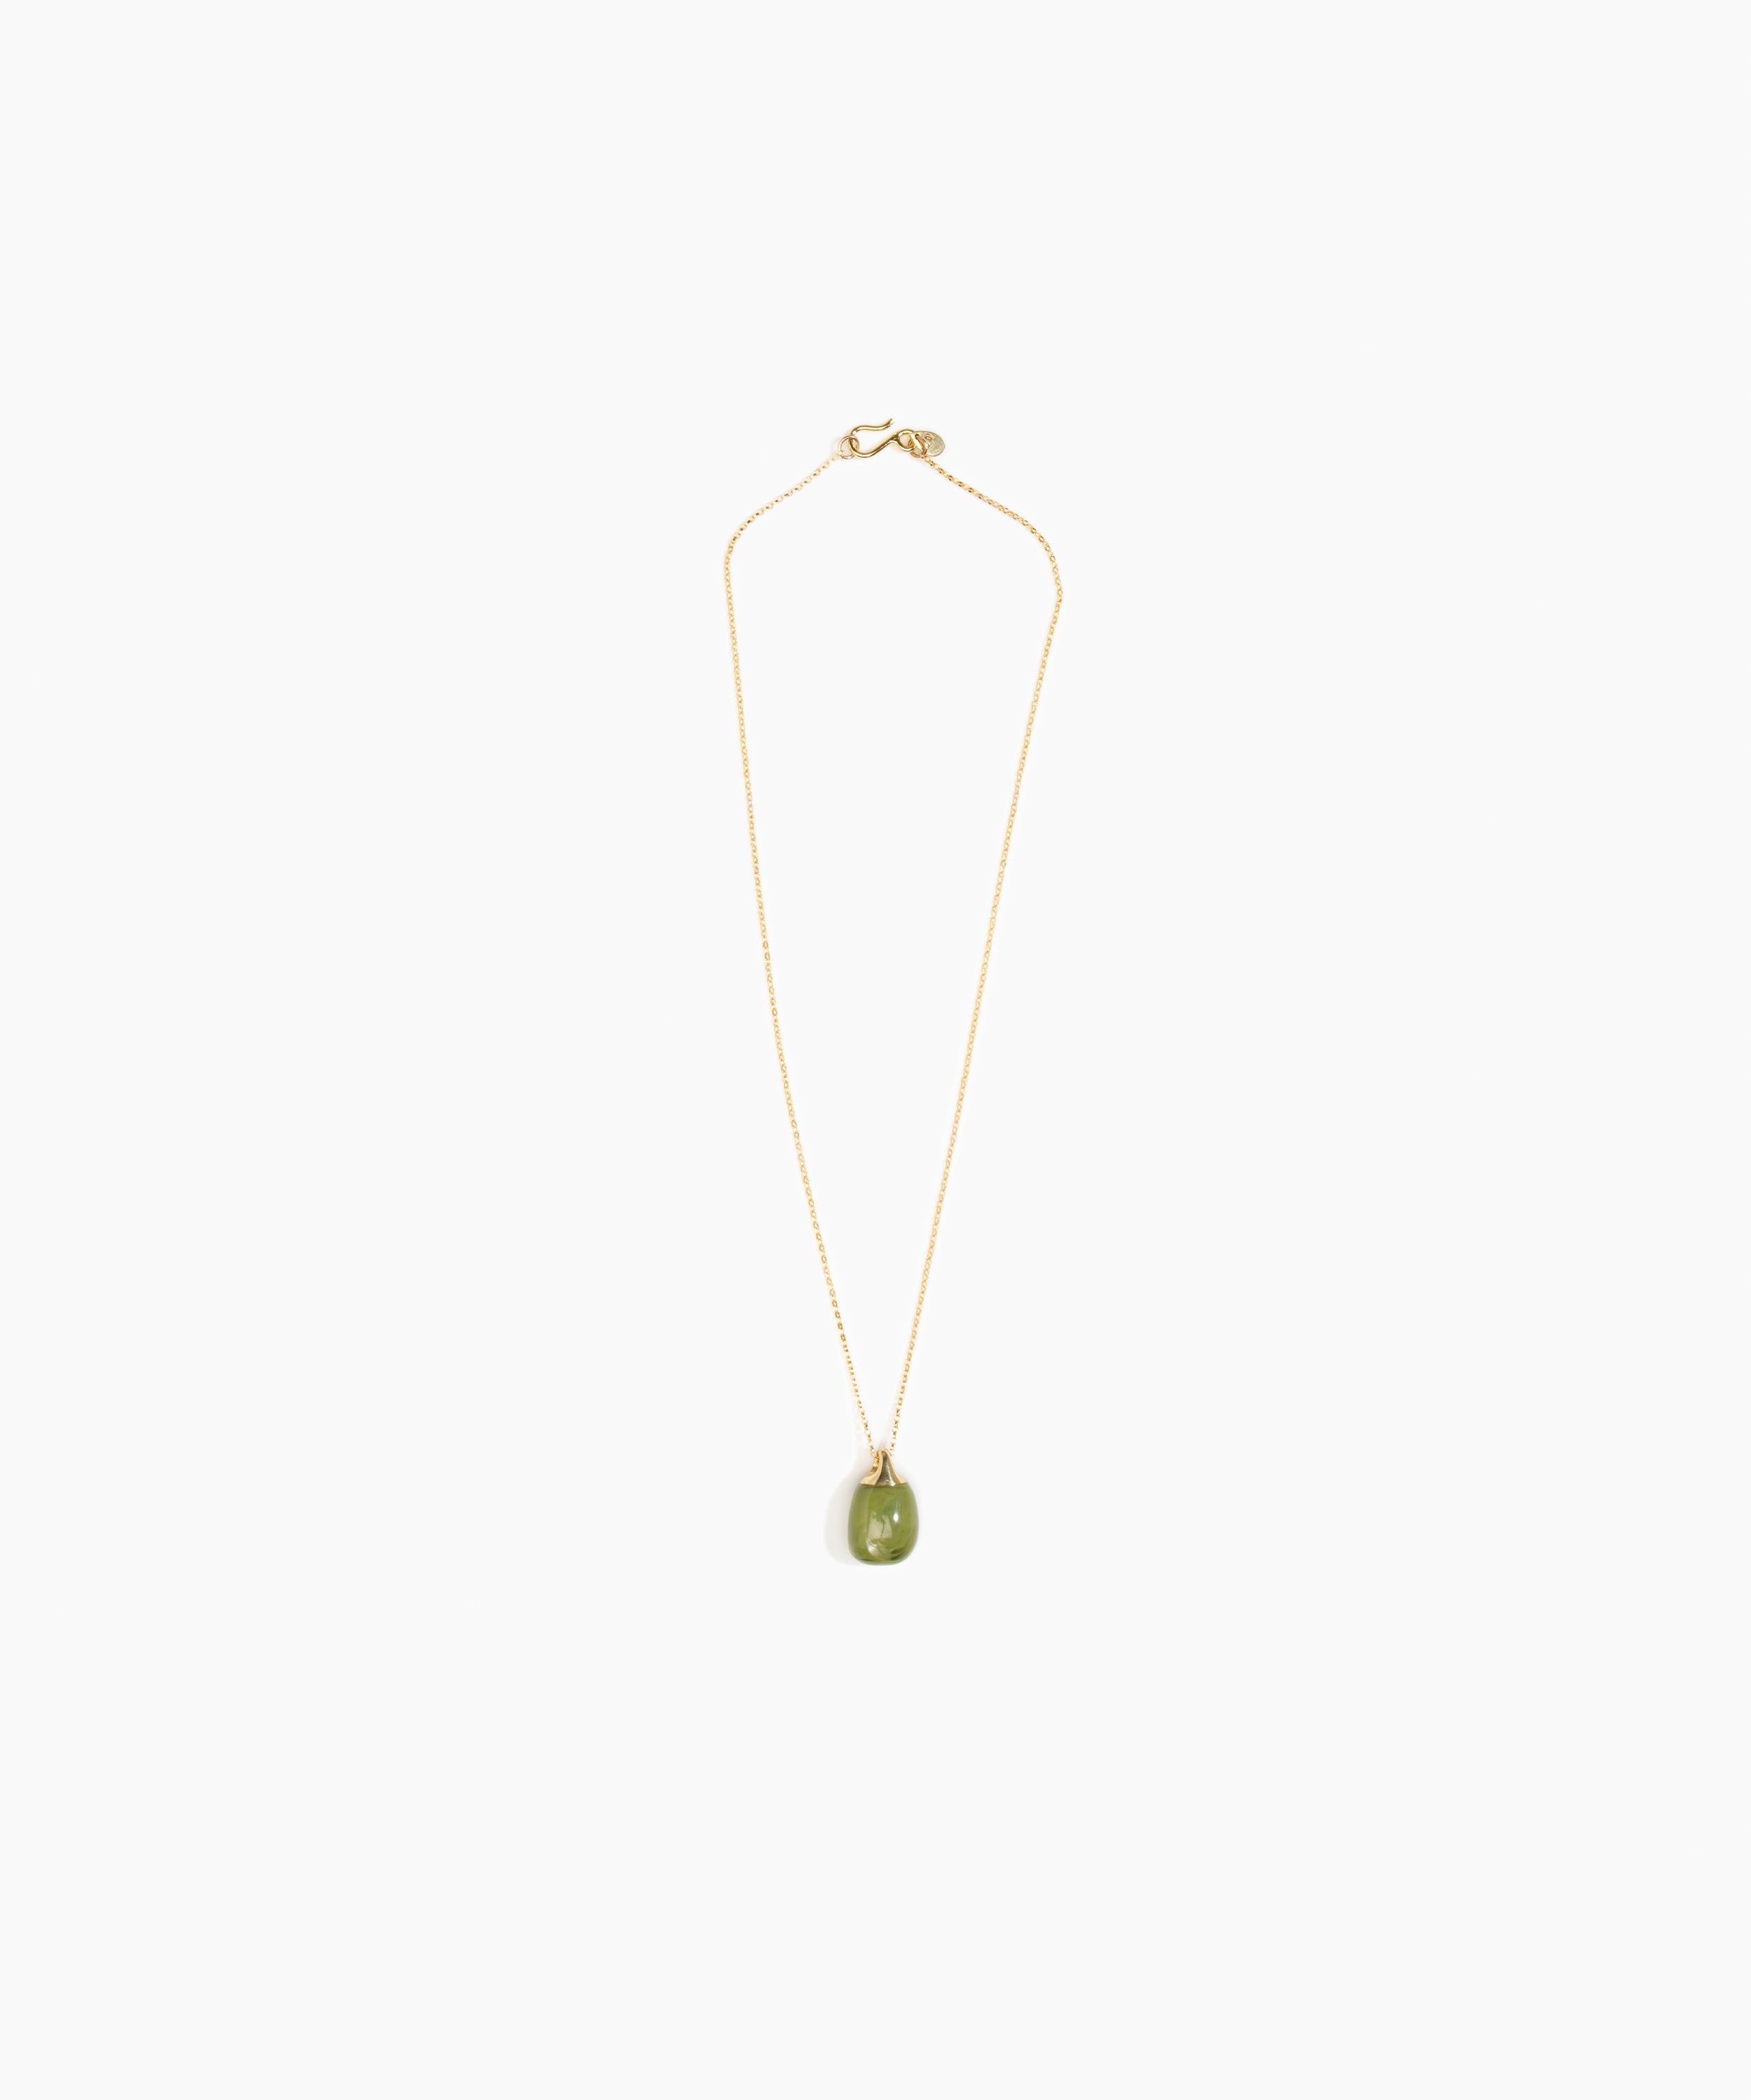 Dinosaur Designs Small River Rock Pendant Necklaces in Olive Colour resin with Gold-Filled Material